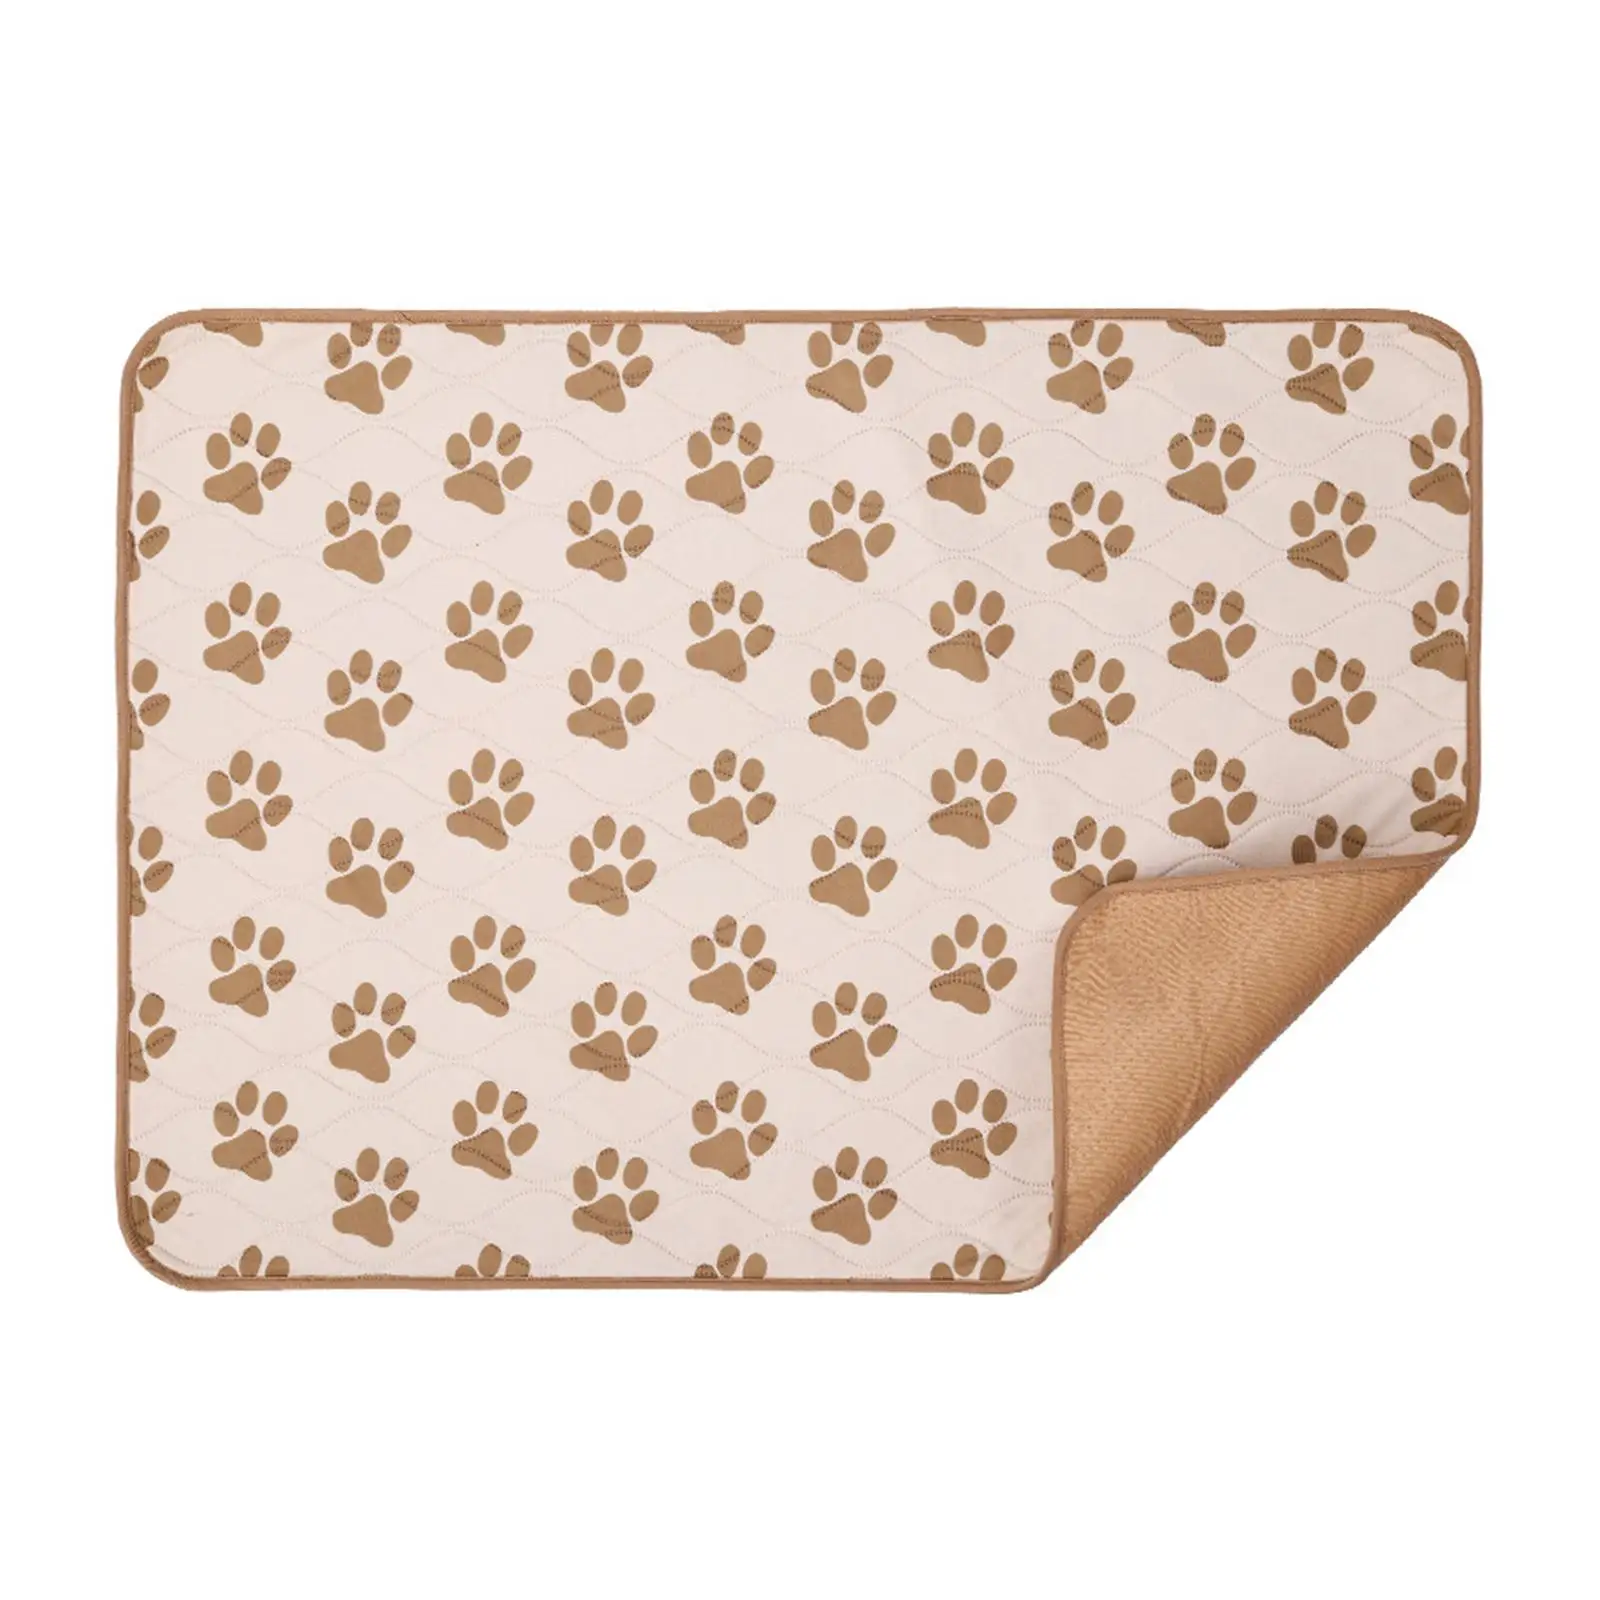 Pet Dog Pee Pad for Puppy Kitten Reusable Washable Cushion Kennel Blanket Mat Bed for Playpen Crate Cage Supplies Home Travel